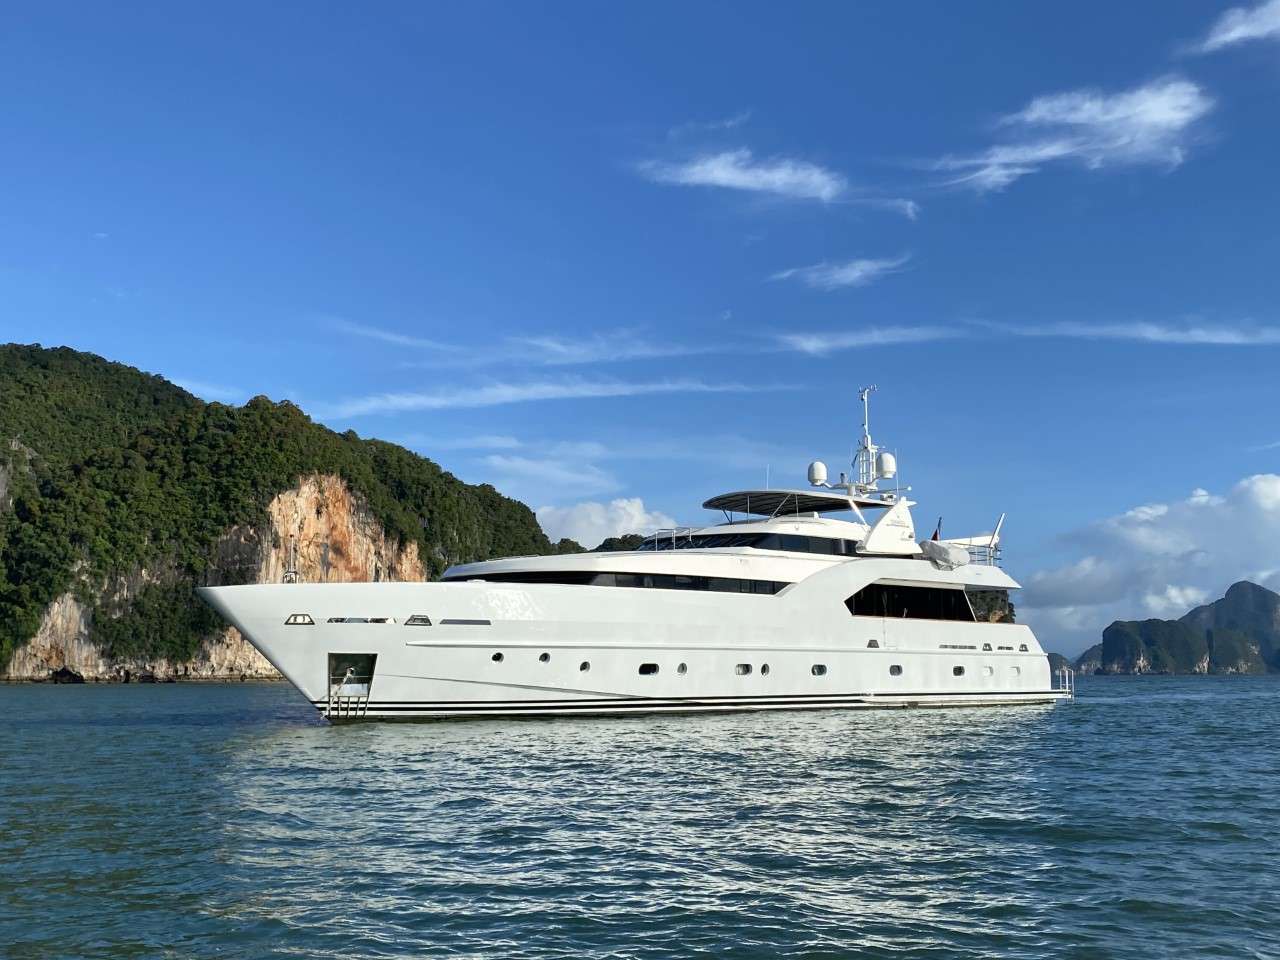 The 111.5-foot (34m) XANADU has been fully refitted over a two-year period to the highest of standards. Relaunched November 2021, all machinery has been completely overhauled, exterior has been resprayed in a stylish 'Whisper-Grey' shade, she's been fitted with new teak decks and all systems have been upgraded. Her fresh, new exterior furnishings, updates to the interior and functional lay-out allow for sophisticated entertaining, socializing and dining.

The yacht's timelessly elegant interior showcases rich high-gloss cherry woods and plush furnishings, to create a stylish and welcoming ambiance. The formal dining is uniquely located aft of the main salon, offering guests a wonderful dining experience while enjoying exceptional views.

XANADU welcomes eight guests in four luxurious staterooms. Her full-beam, main-deck master suite is fitted with a skylight to dazzle stargazers and includes a private office with optional sofa bed for an additional guest. The master has a king-size bed and lavish en-suite bathroom with gold-plated fittings. The stately yacht&rsquo;s additional three spacious double-bed staterooms located on the lower deck, are complete with their own en-suite bathrooms.

Motor yacht XANADU&rsquo;s flybridge provides space for yoga sessions, massage, and lounging with family and friends. Complete with a bar, barbeque, sun pads, alfresco dining and sensational views of the cruising destination, everyone will enjoy time spent on deck.

To further unwind, XANADU features a sauna on the lower deck, providing leisurely relaxation. Her wide range of water toys include two underwater scooters, Yamaha FX Cruiser and an inflatable dock with netted pool.

XANADU is equipped with stabilizers ensuring a comfortable time on board.

XANADU's cruising locations in SE Asia include Thailand, Malaysia. From June to October she may be available the Anambas Islands of Indonesia upon request, conditions permitting.